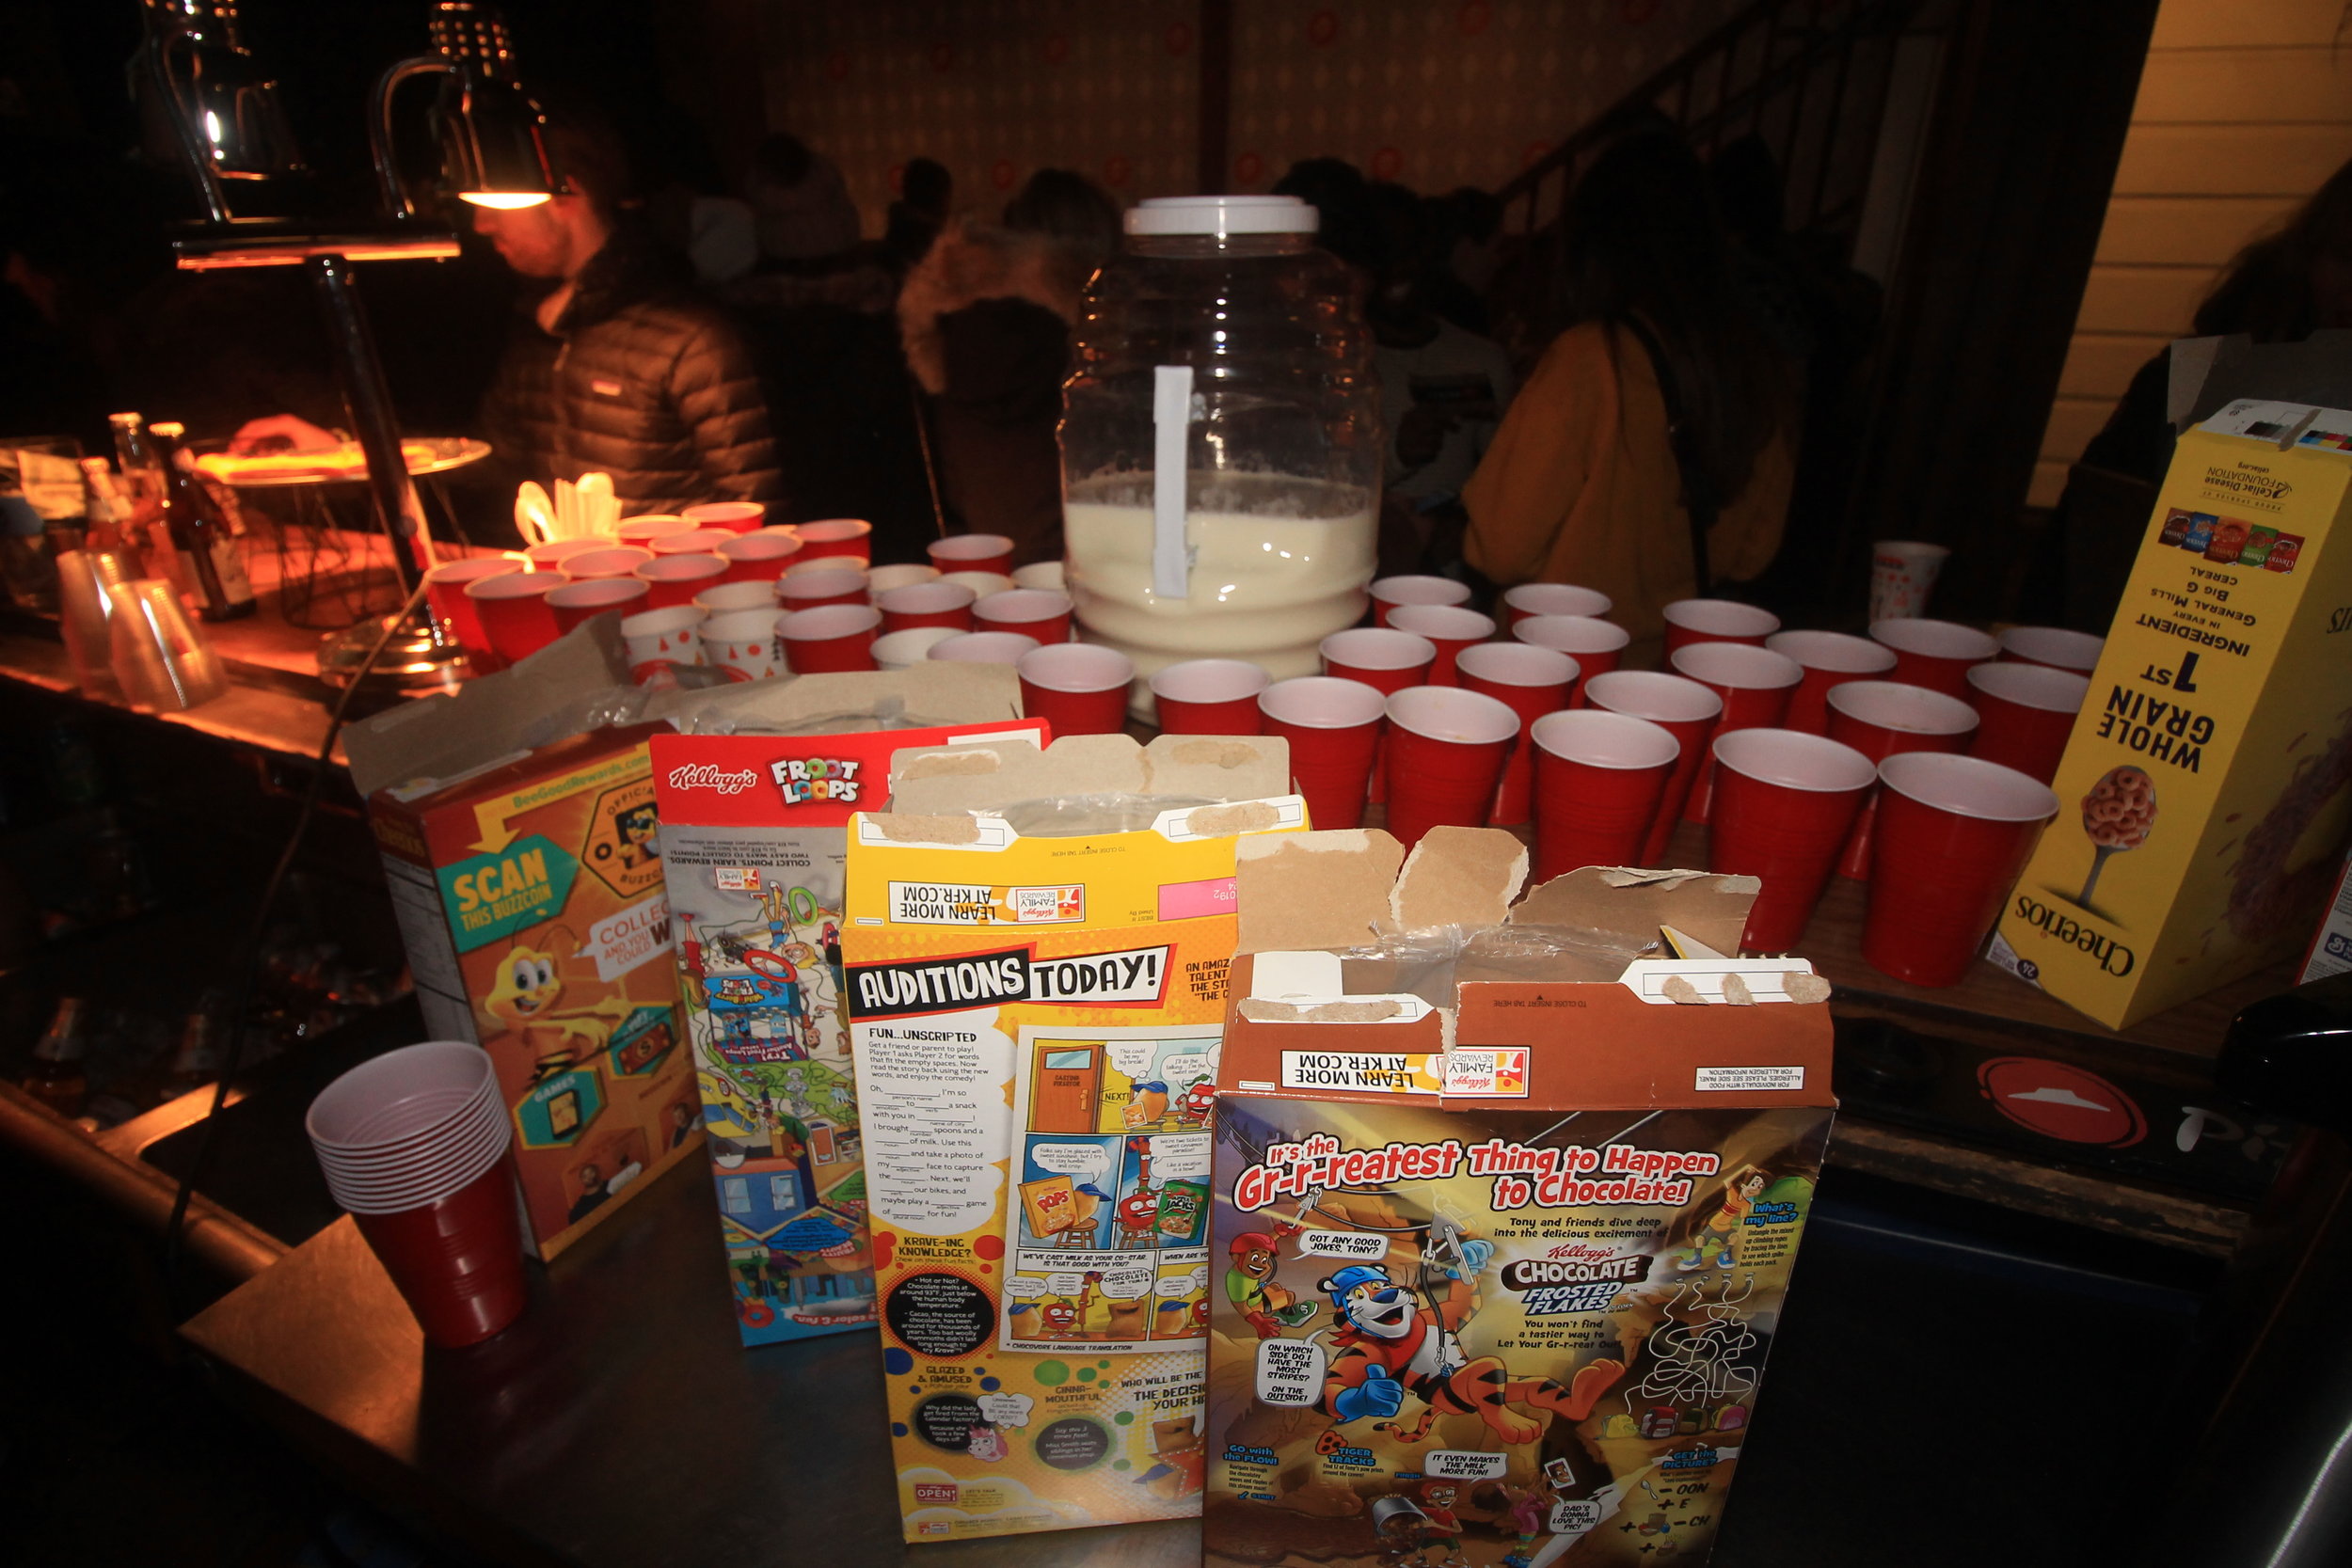  We murdered our favorite cereals with our Cereal Killer party… best idea we’ve ever had! 